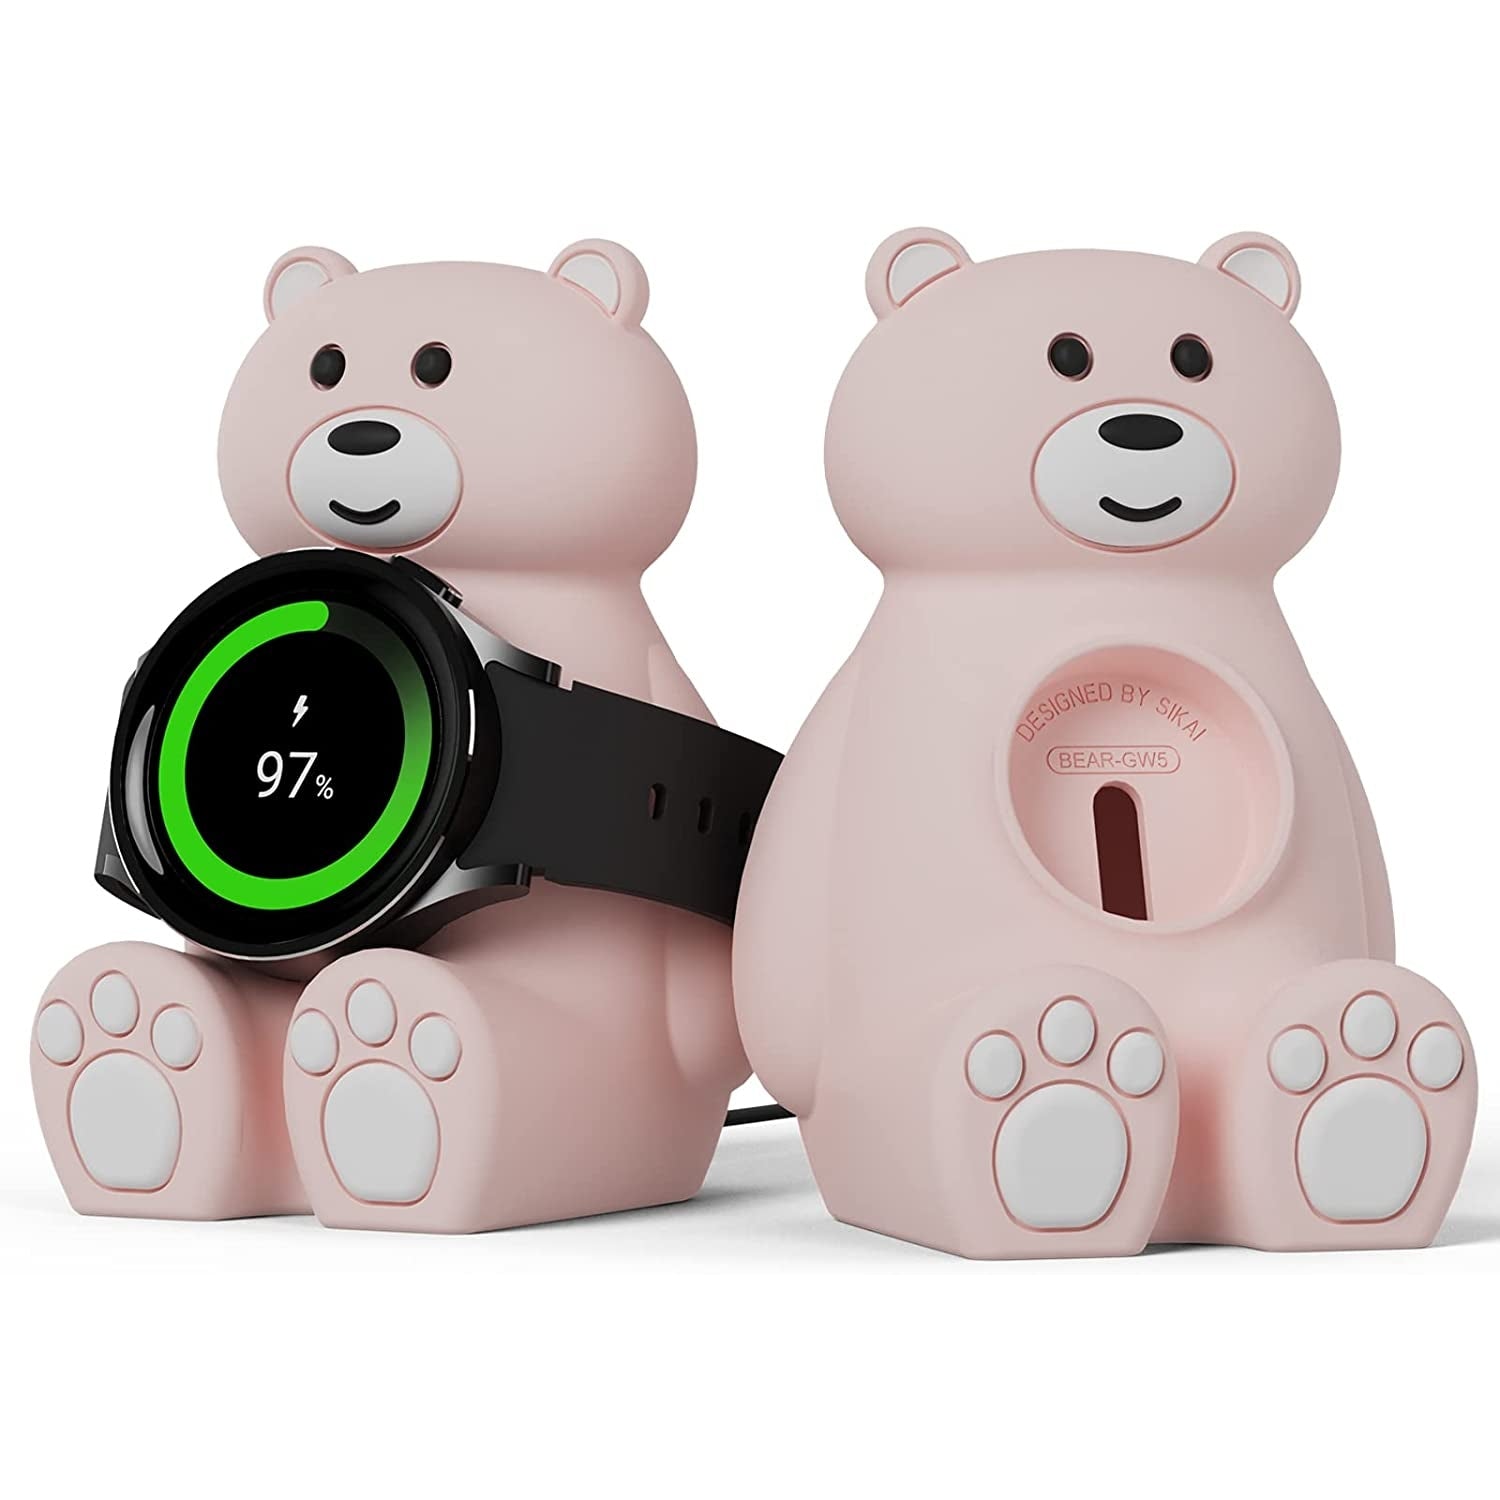 SIKAI Bear Slicone Case Watch Stand for Samsung Galaxy Watch 5 44mm 40mm 5Pro 55mm SIKAI CASE